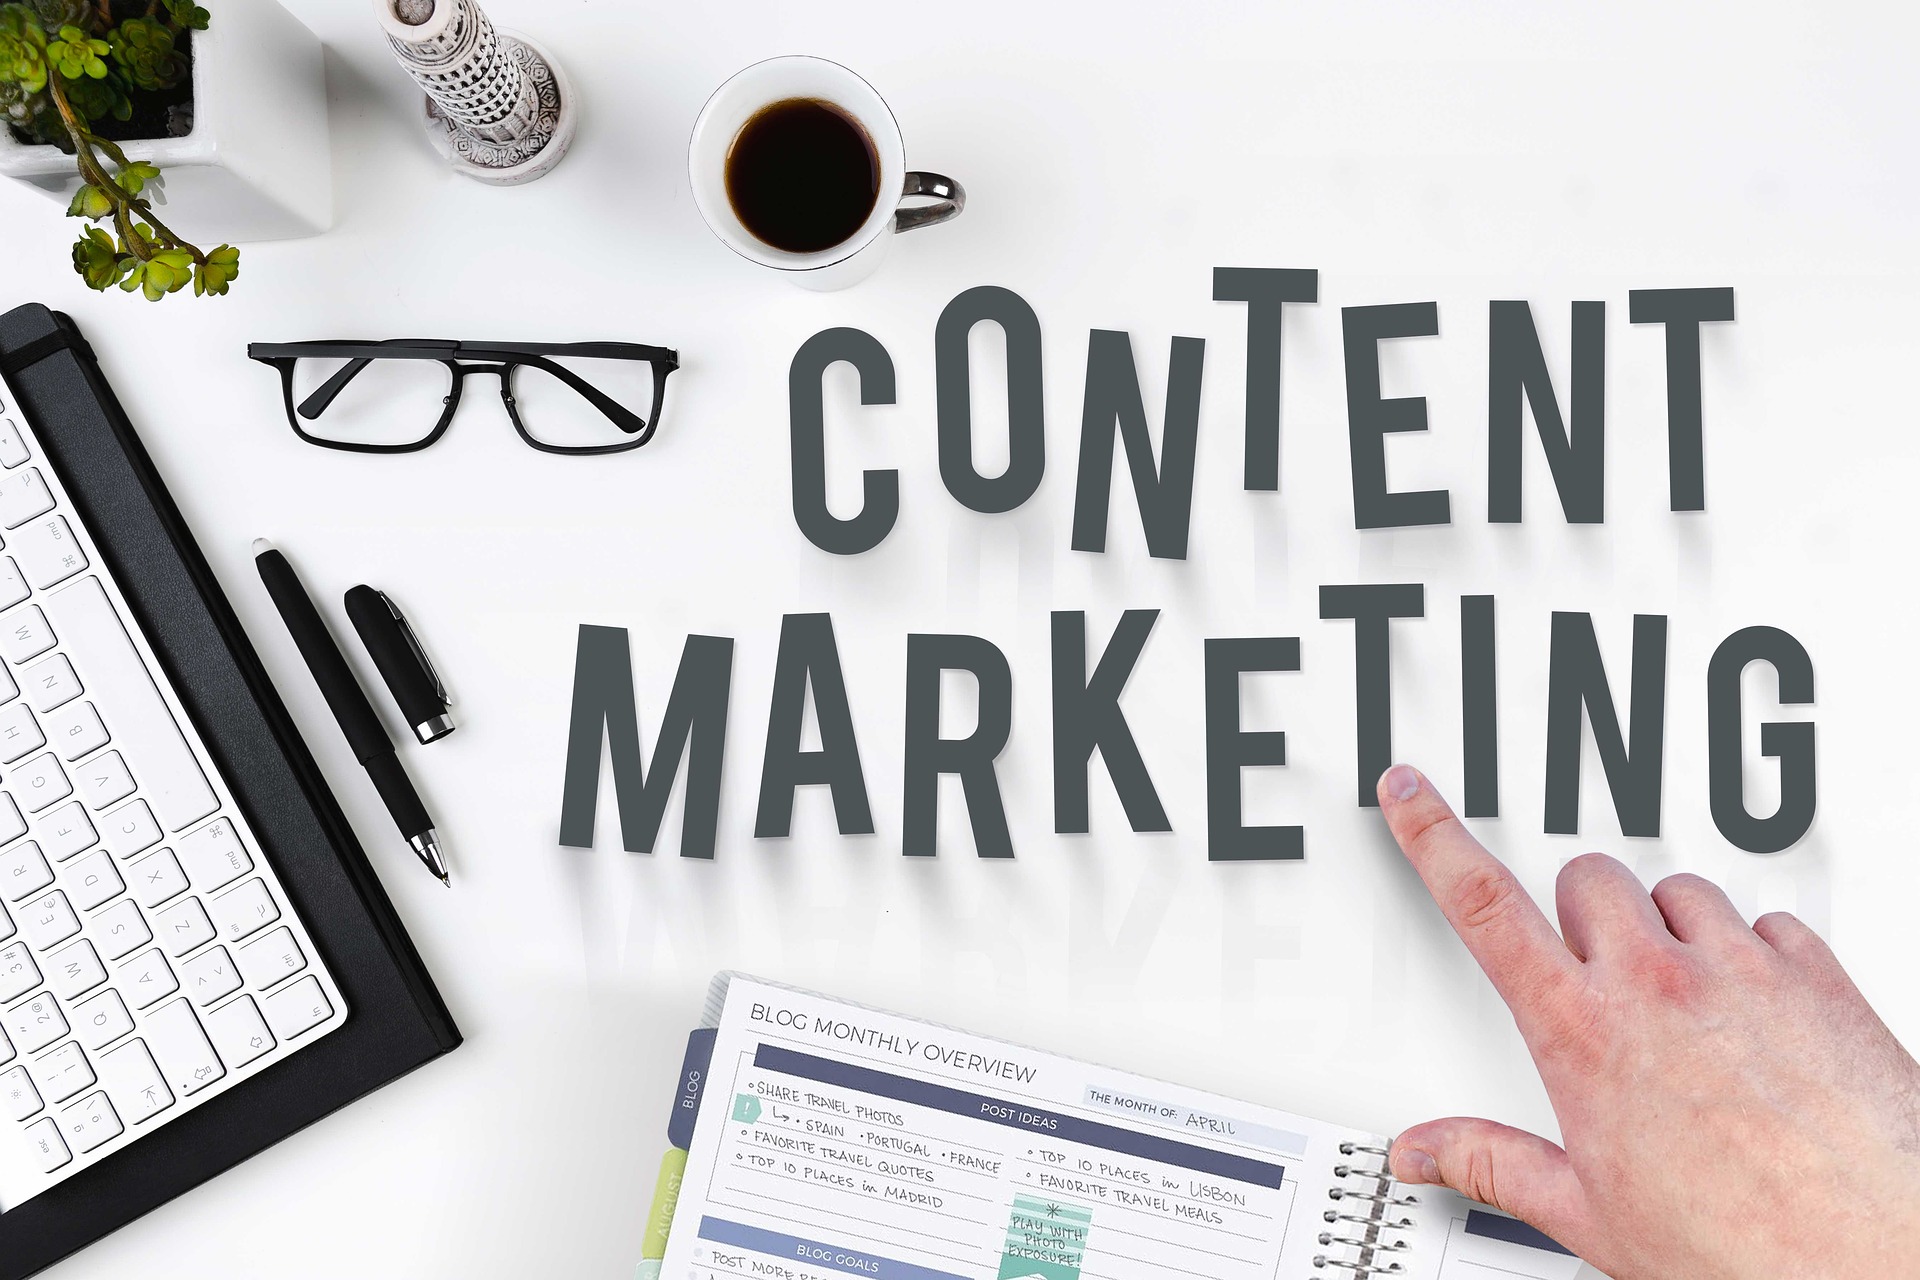 How to use content marketing to increase brand awareness - SmartBrief